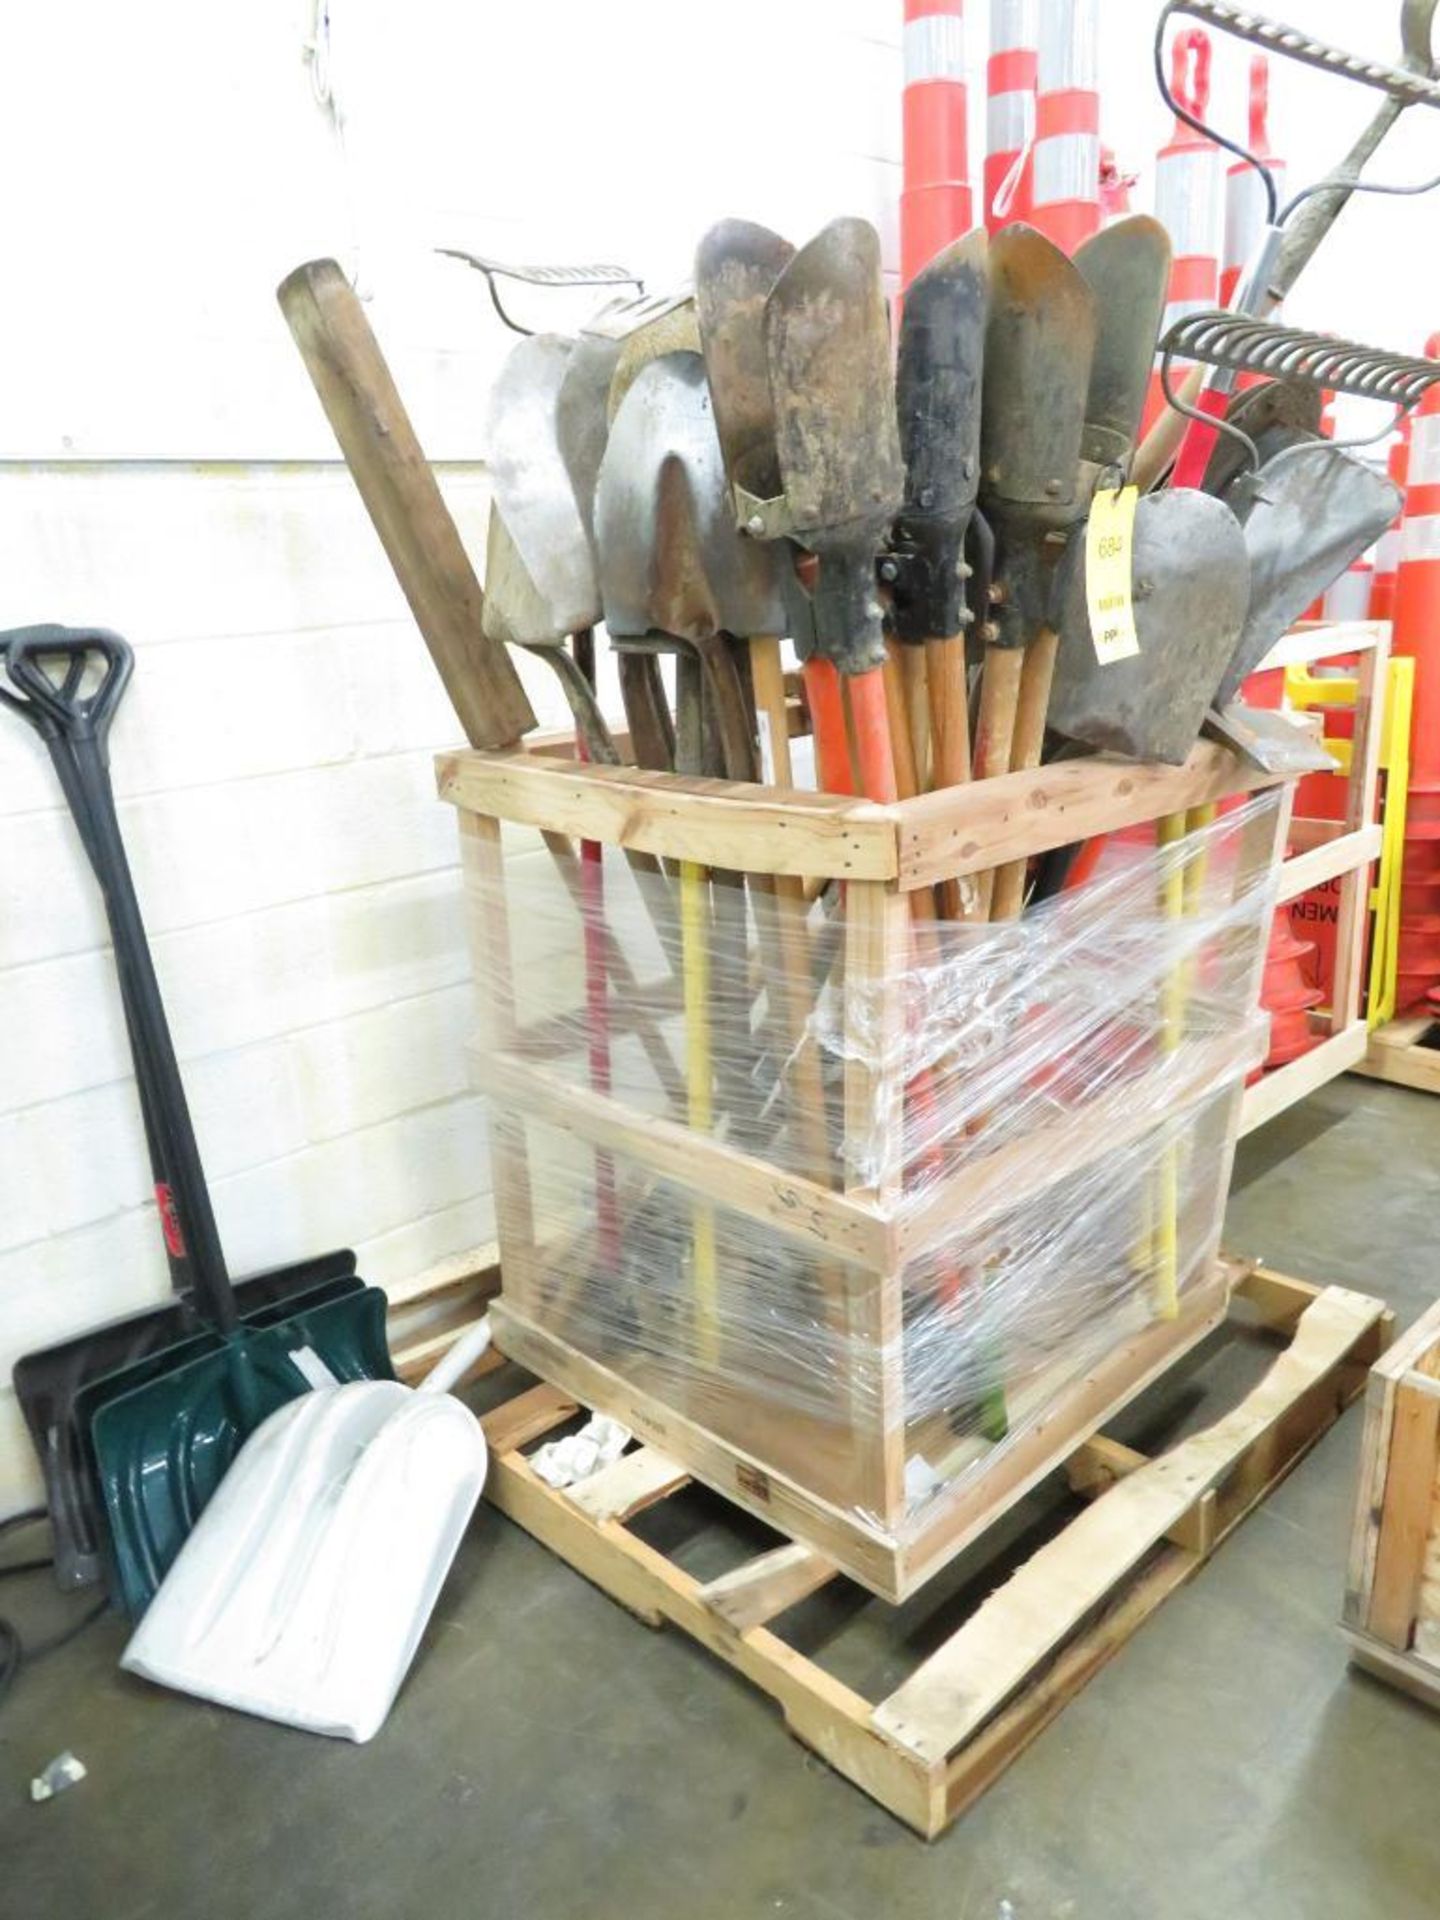 LOT: Post Hole Diggers, Shovels, Rakes & Pick Axes in (1) Crate